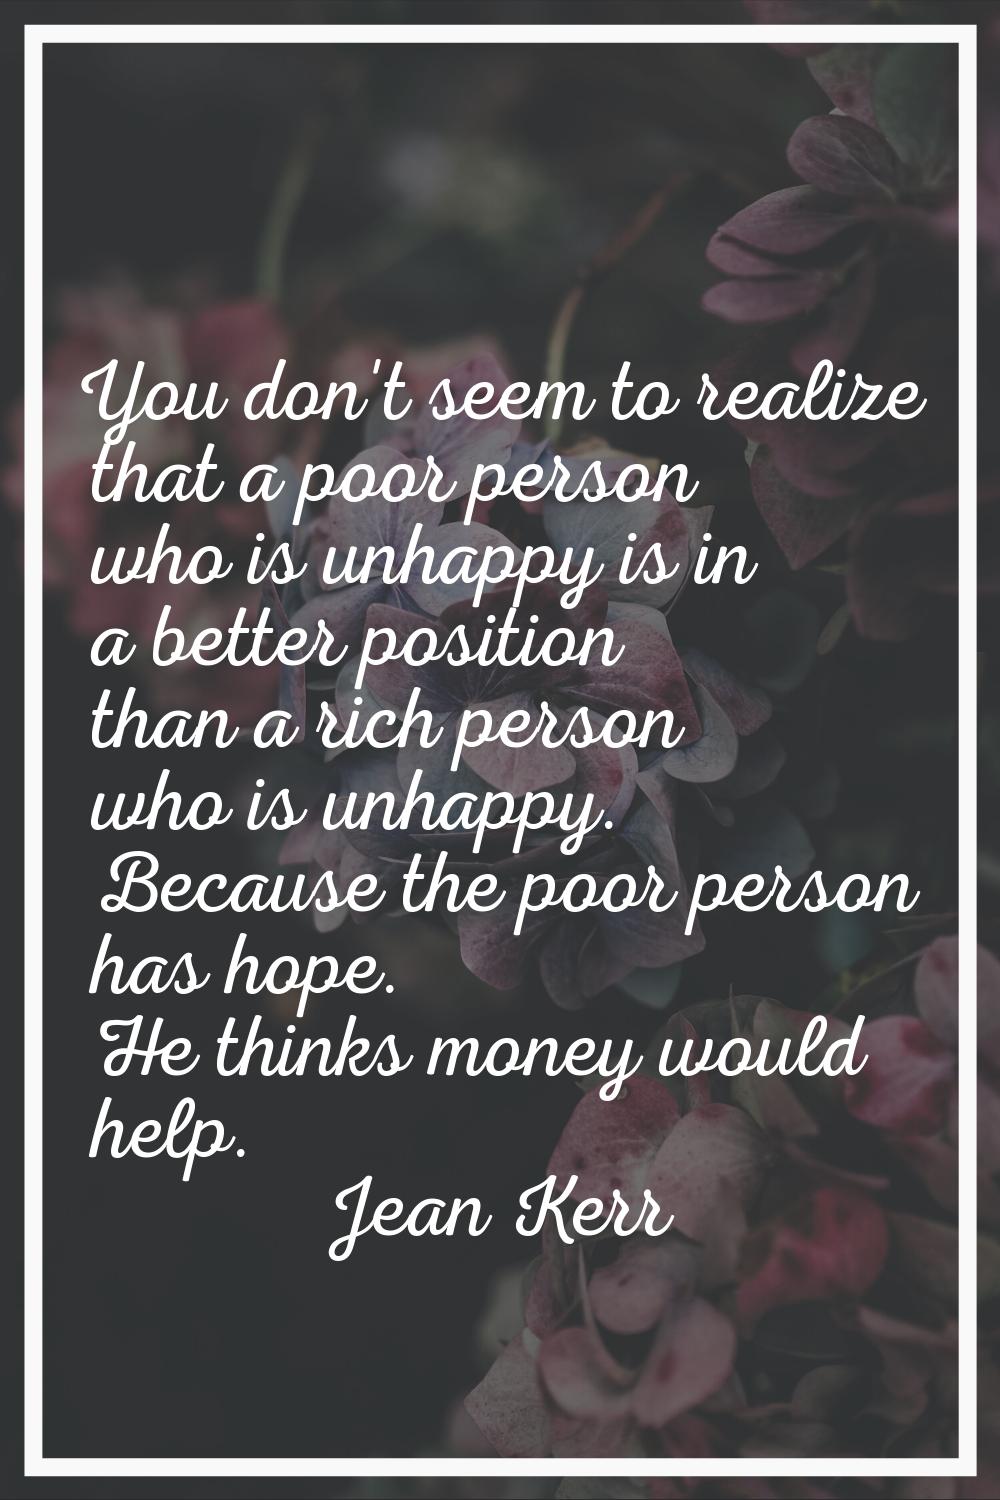 You don't seem to realize that a poor person who is unhappy is in a better position than a rich per